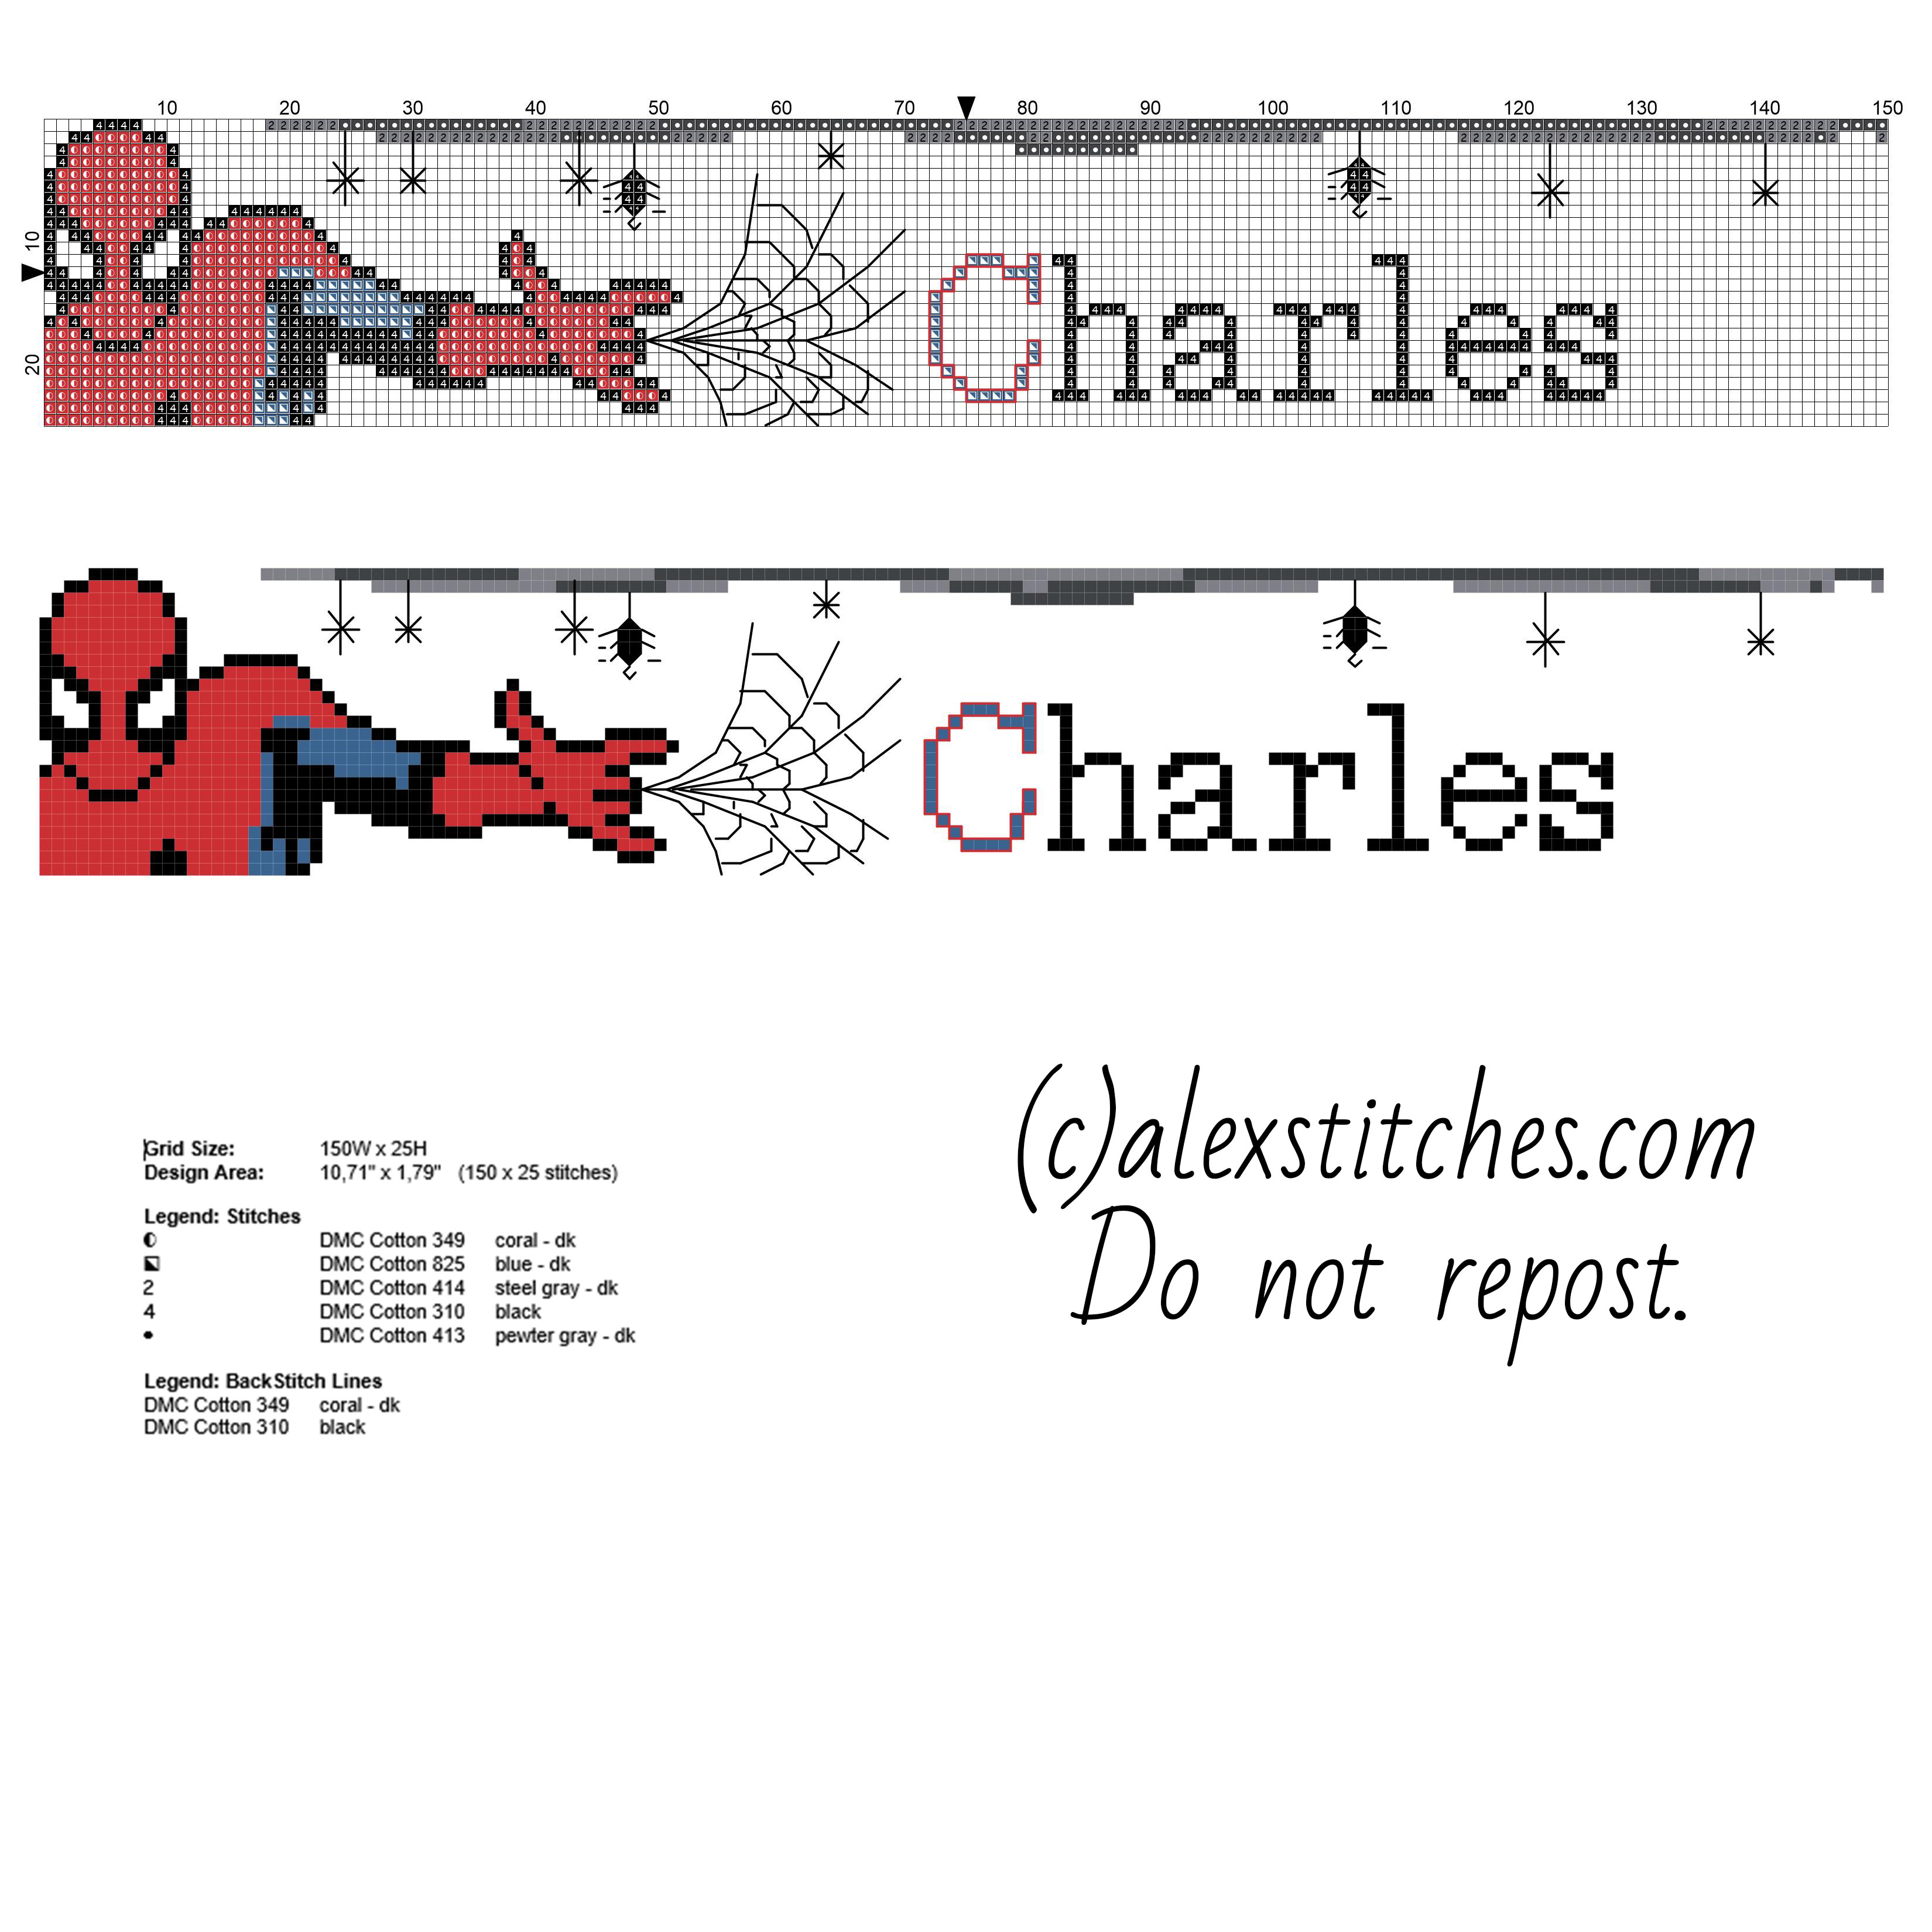 Name Chaqrles with Spider Man and some spiders cross stitch pattern